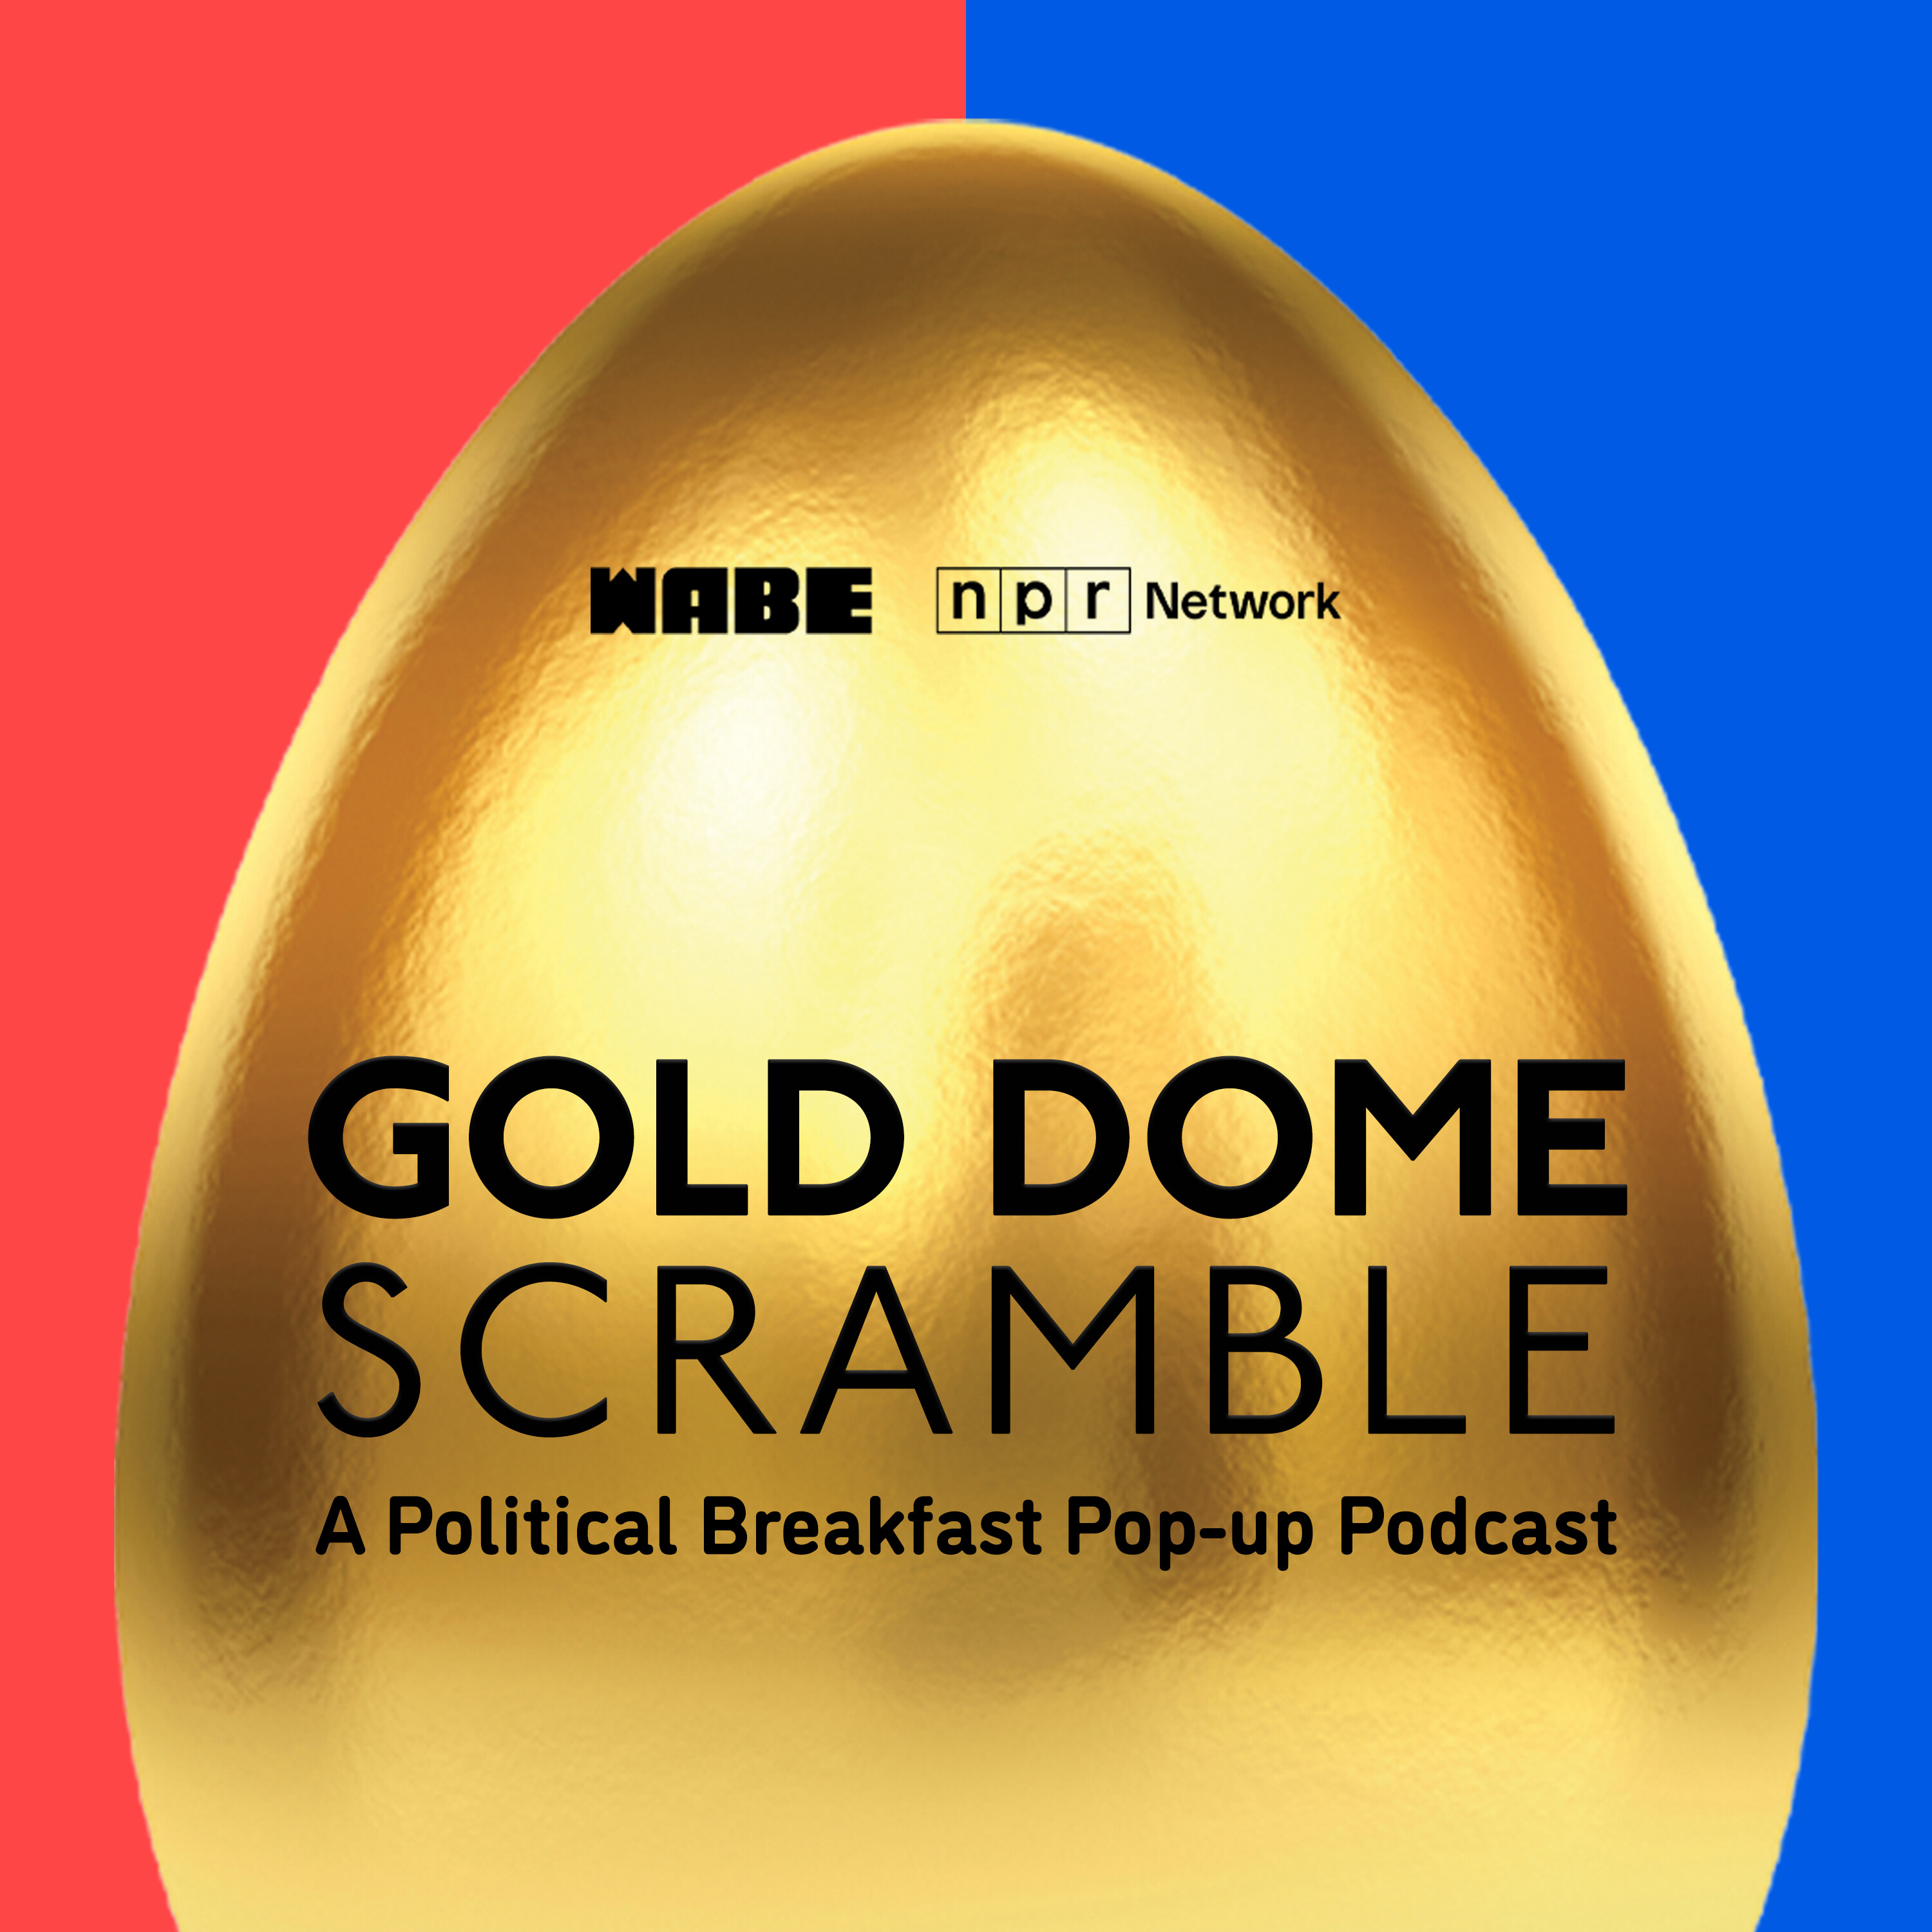 Gold Dome Scramble: Bills to regulate healthcare for transgender kids and define antiSemitism, plus the surge in investor-owned homes for rent